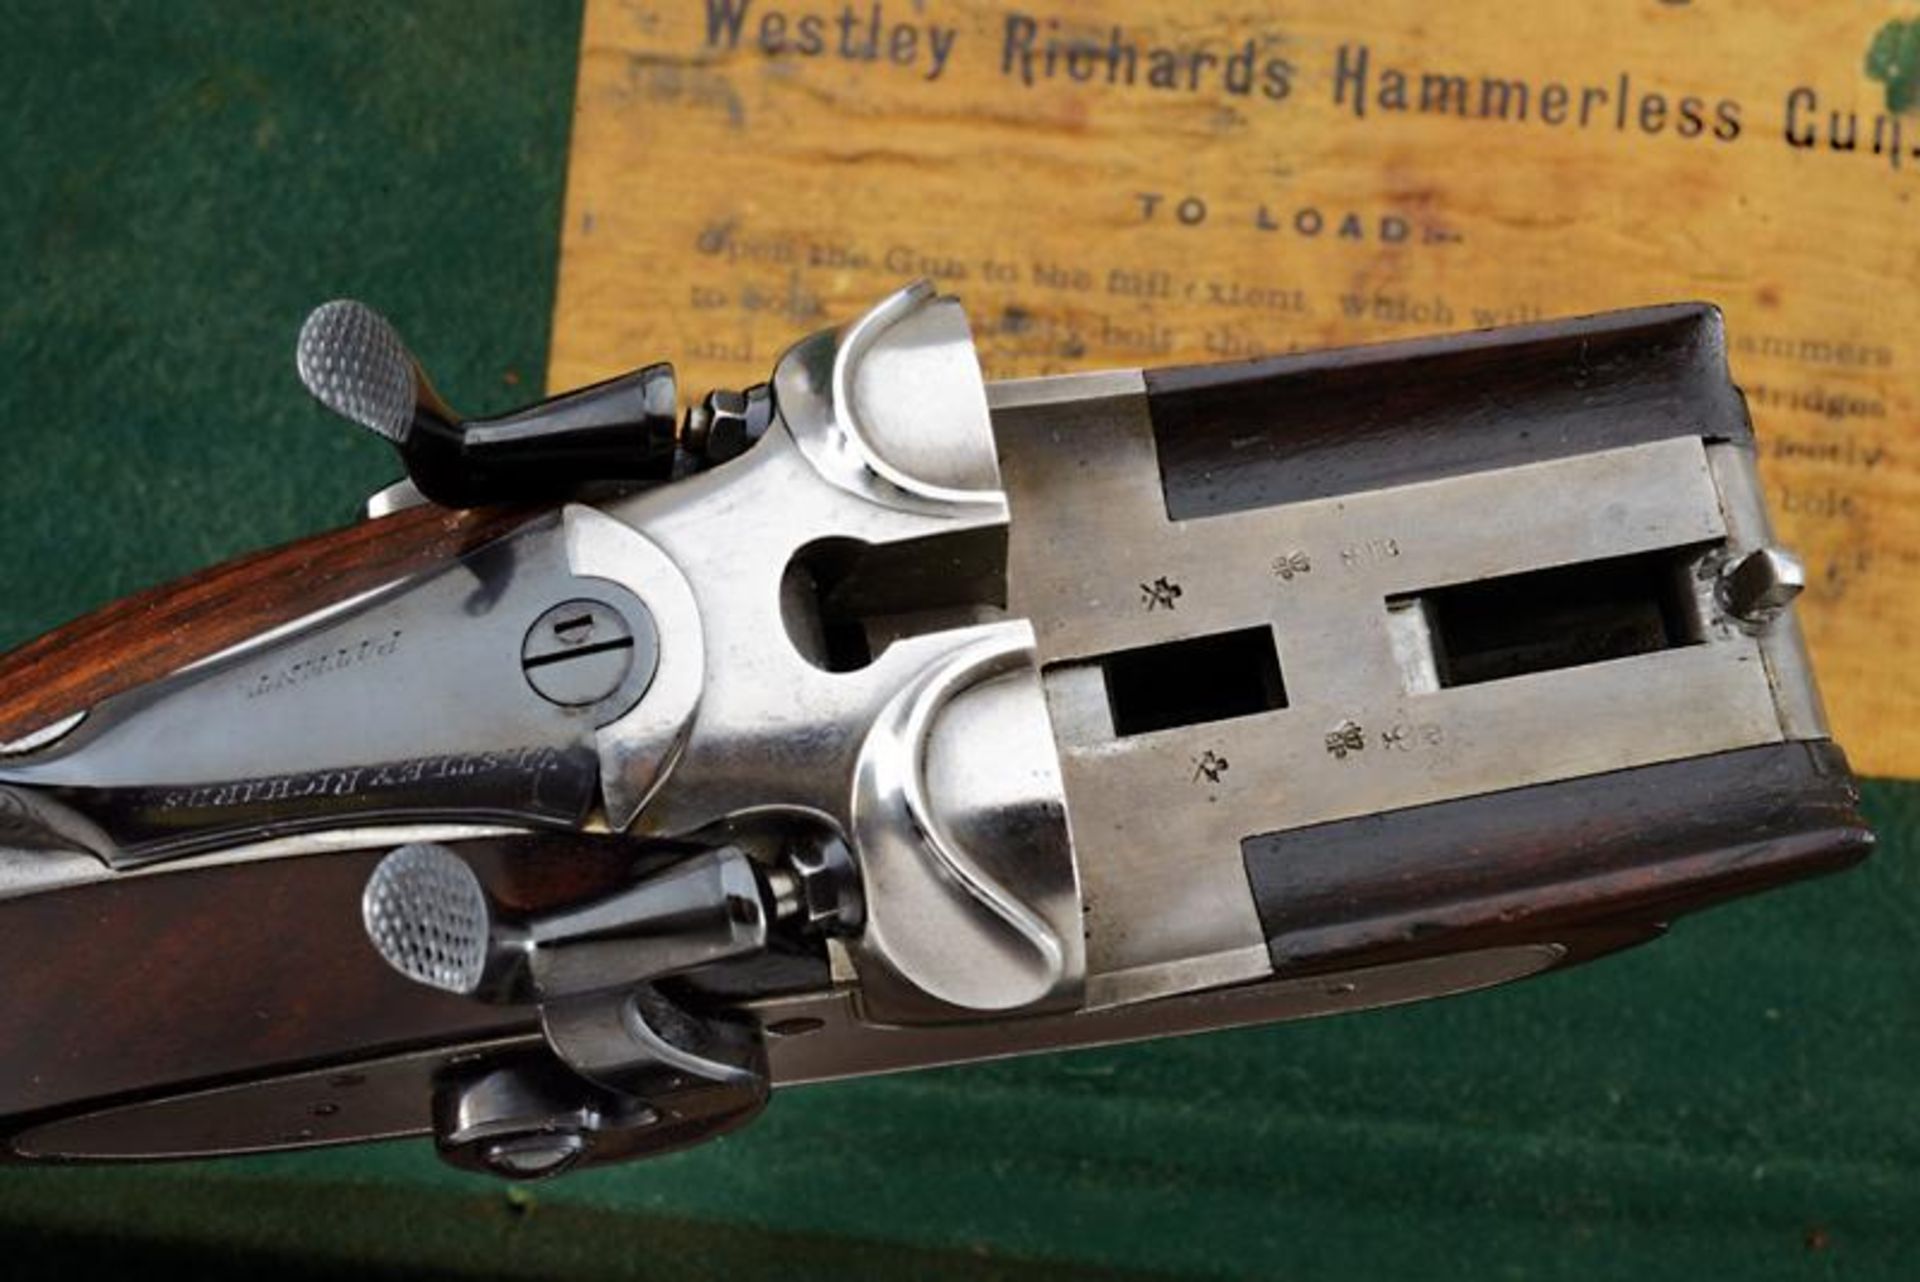 A double-barreled cased breechloading gun by Westley Richards - Image 9 of 12